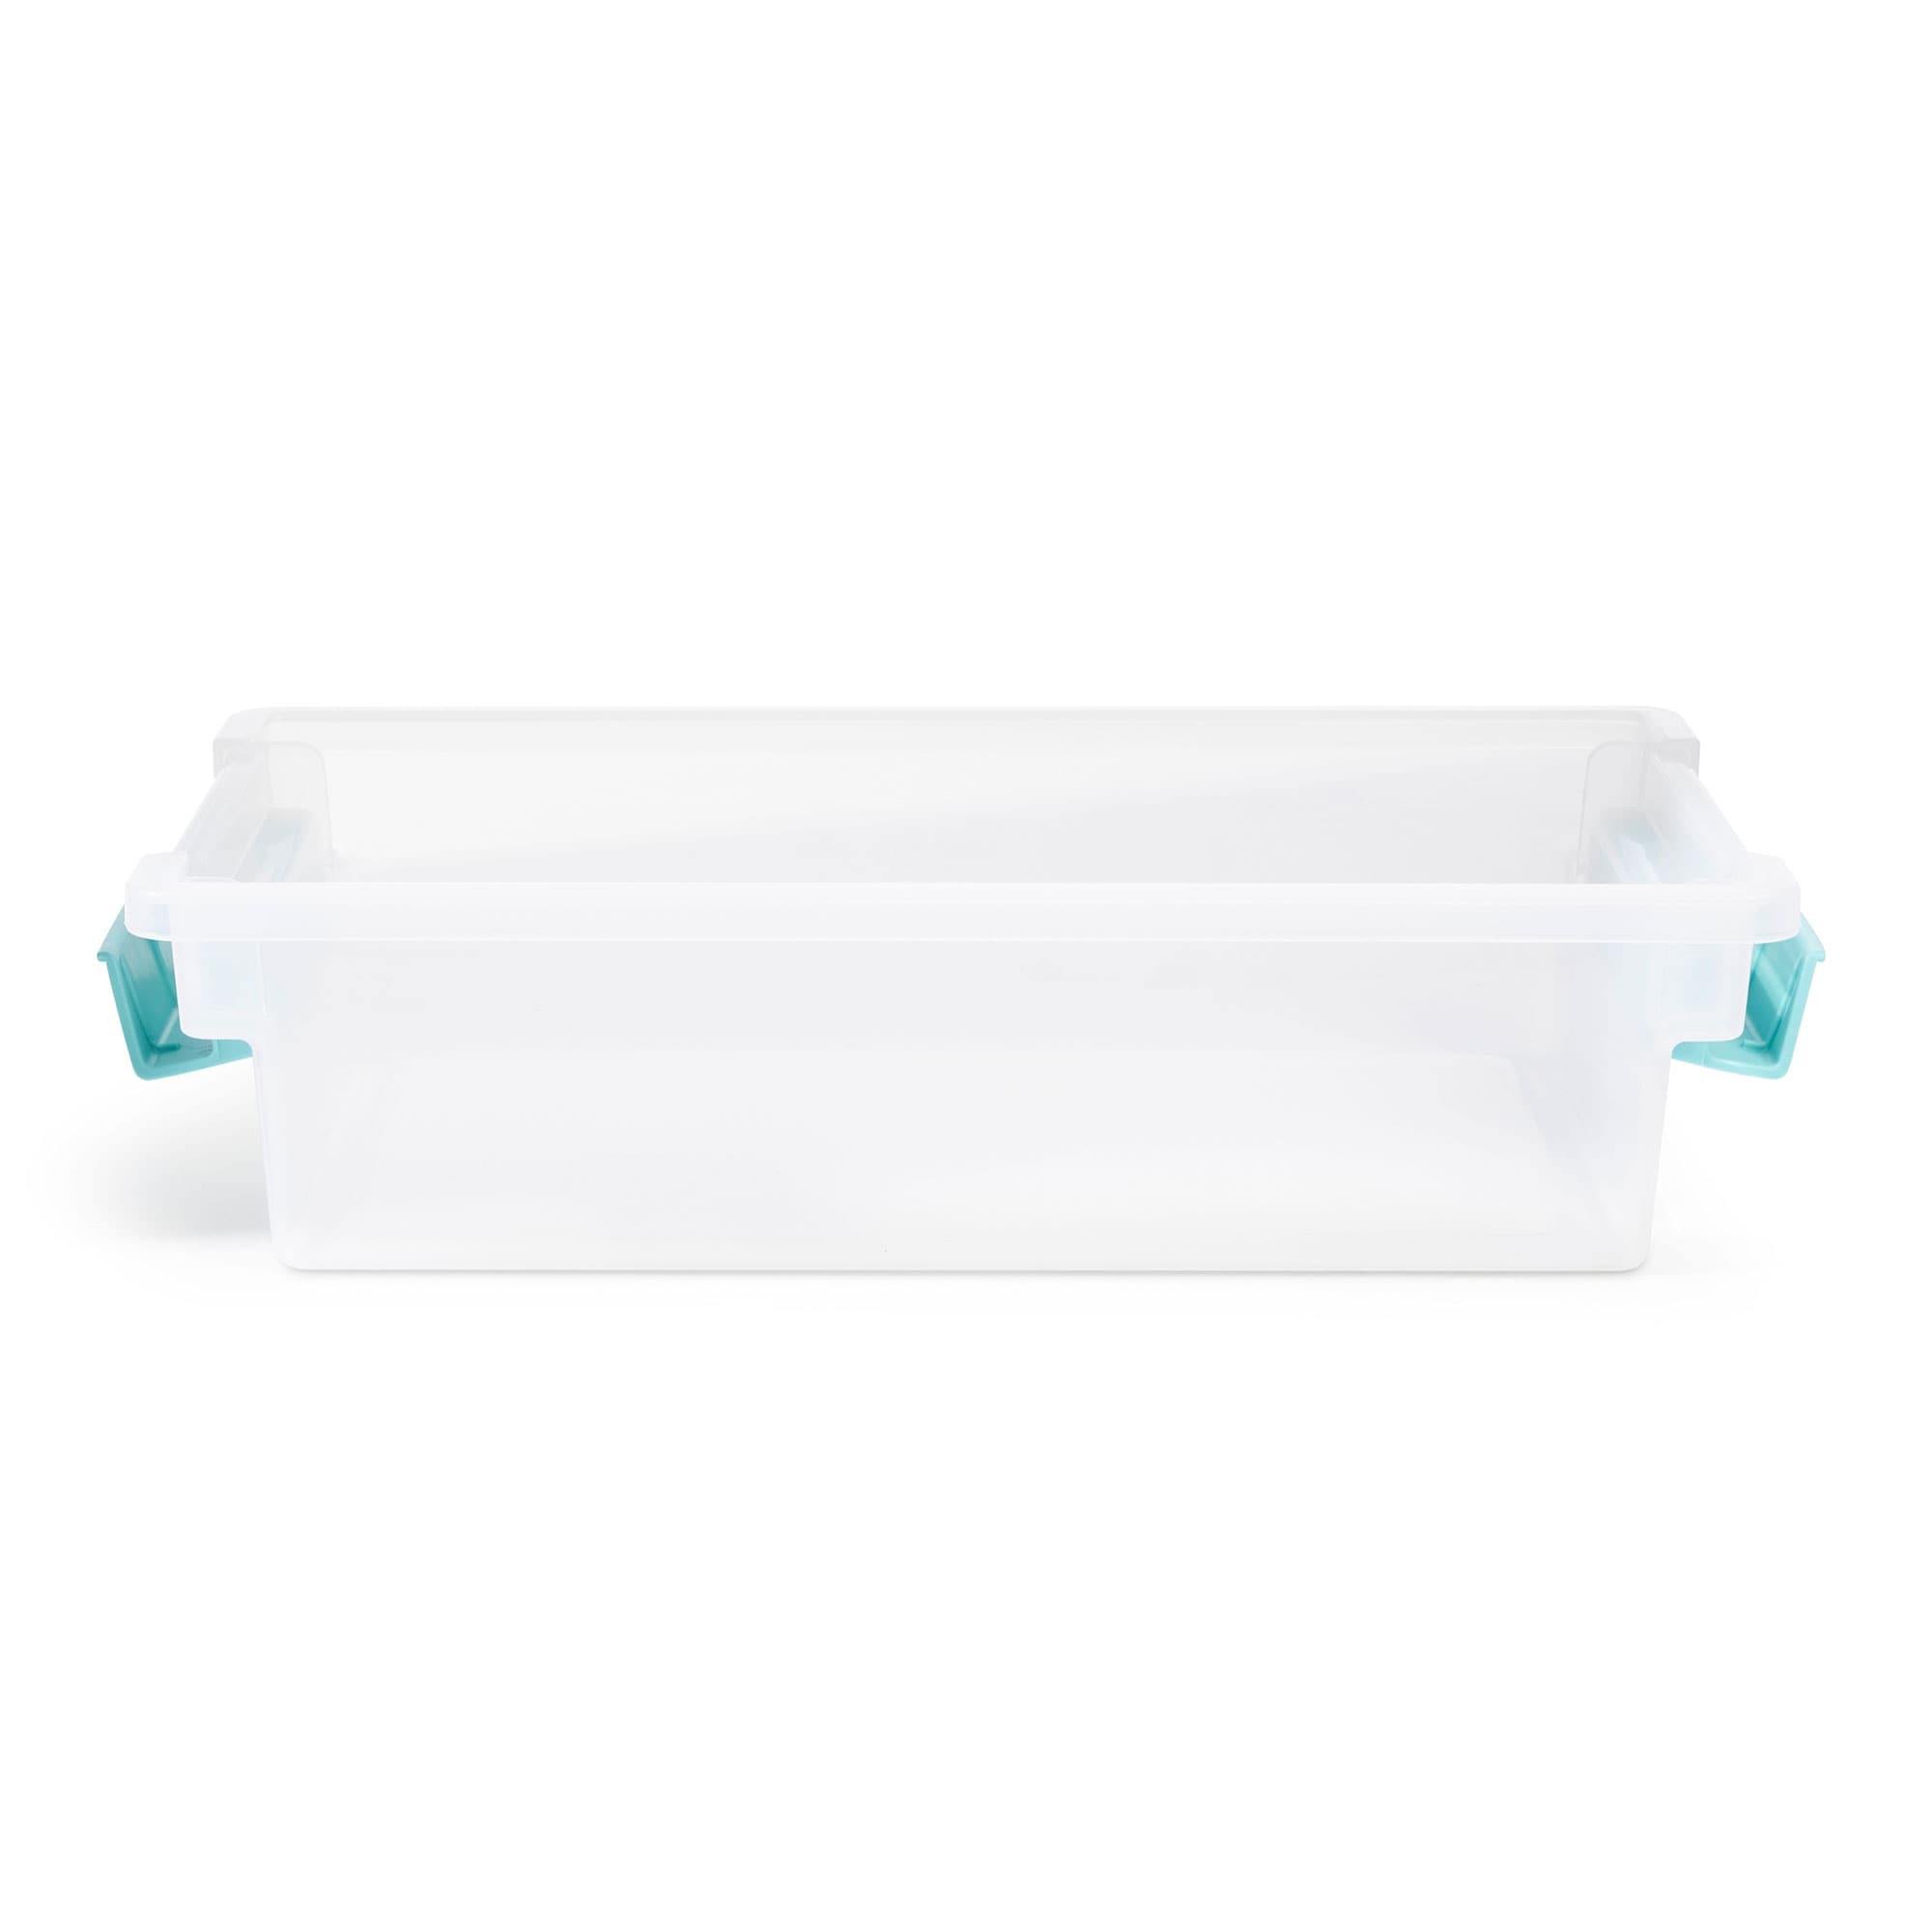 https://ak1.ostkcdn.com/images/products/is/images/direct/858db4f7e0174022eaeb0aa770bae8614a4dead1/Sterilite-Small-Clip-Box-Clear-Storage-Tote-Container-with-Latching-Lid%2C-12-Pack.jpg